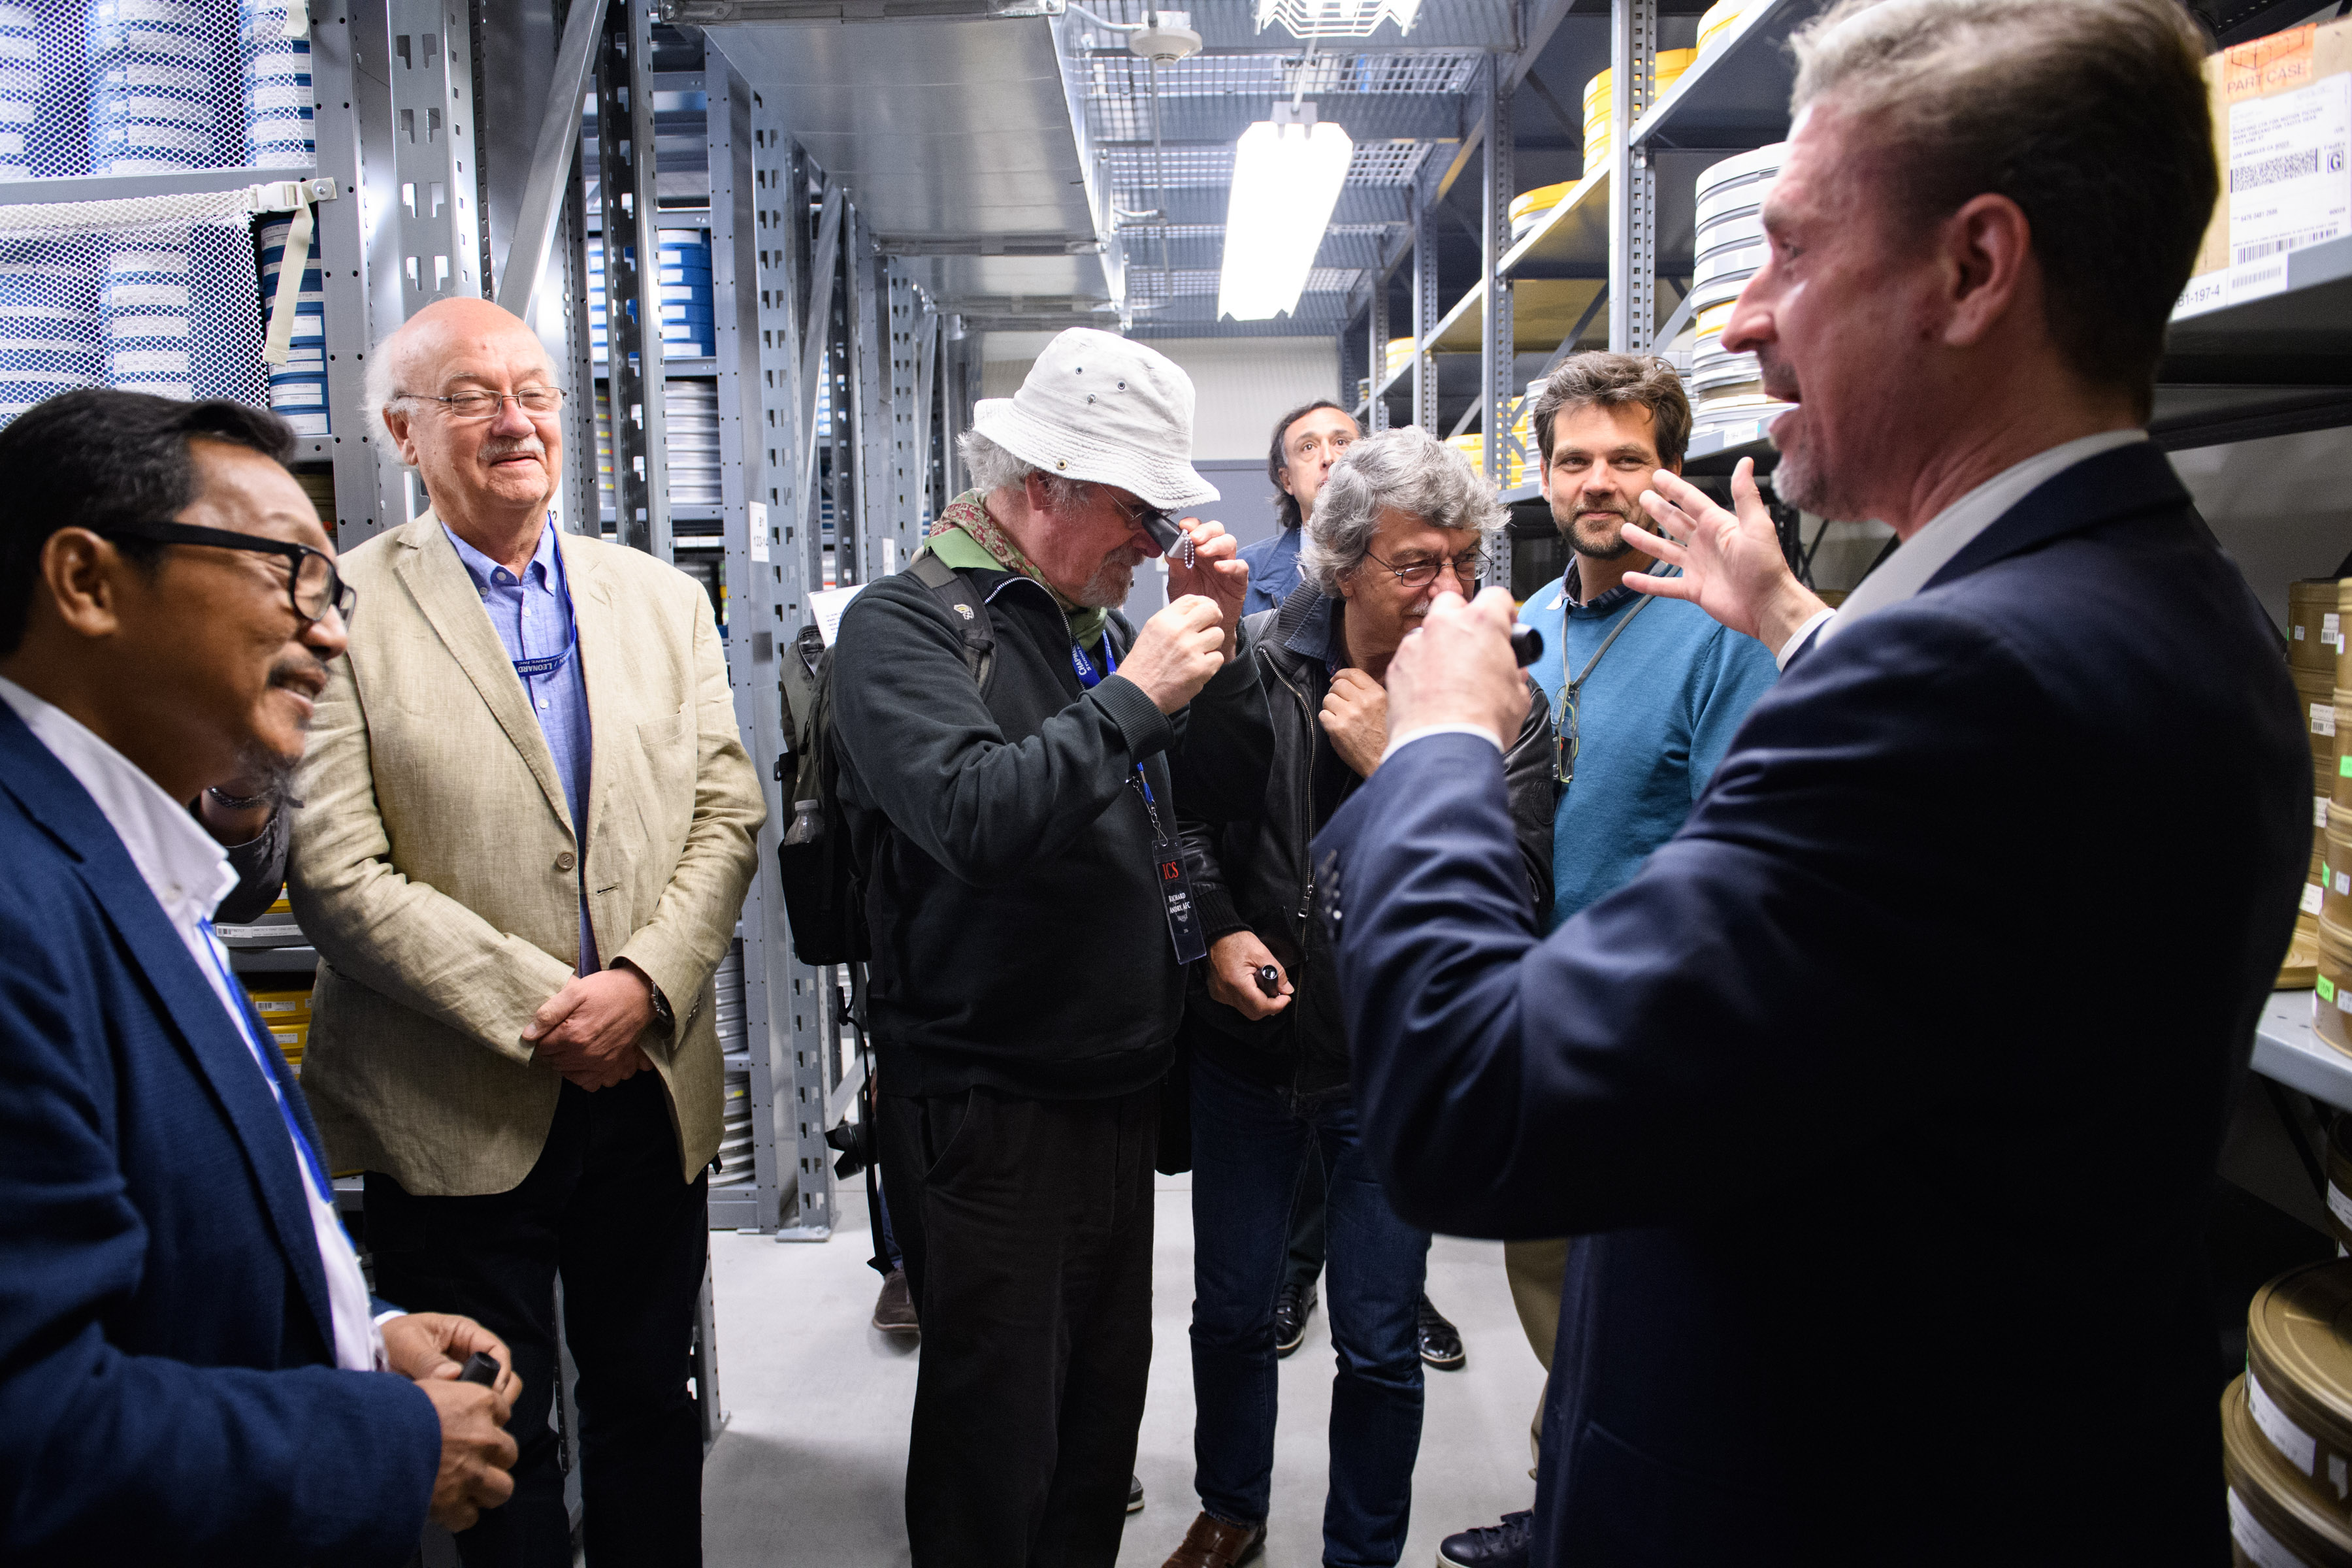 ICS attendees tour the AMPAS archive vaults at the Pickford Center. Photo courtesy of the Academy of Motion Picture Arts and Sciences